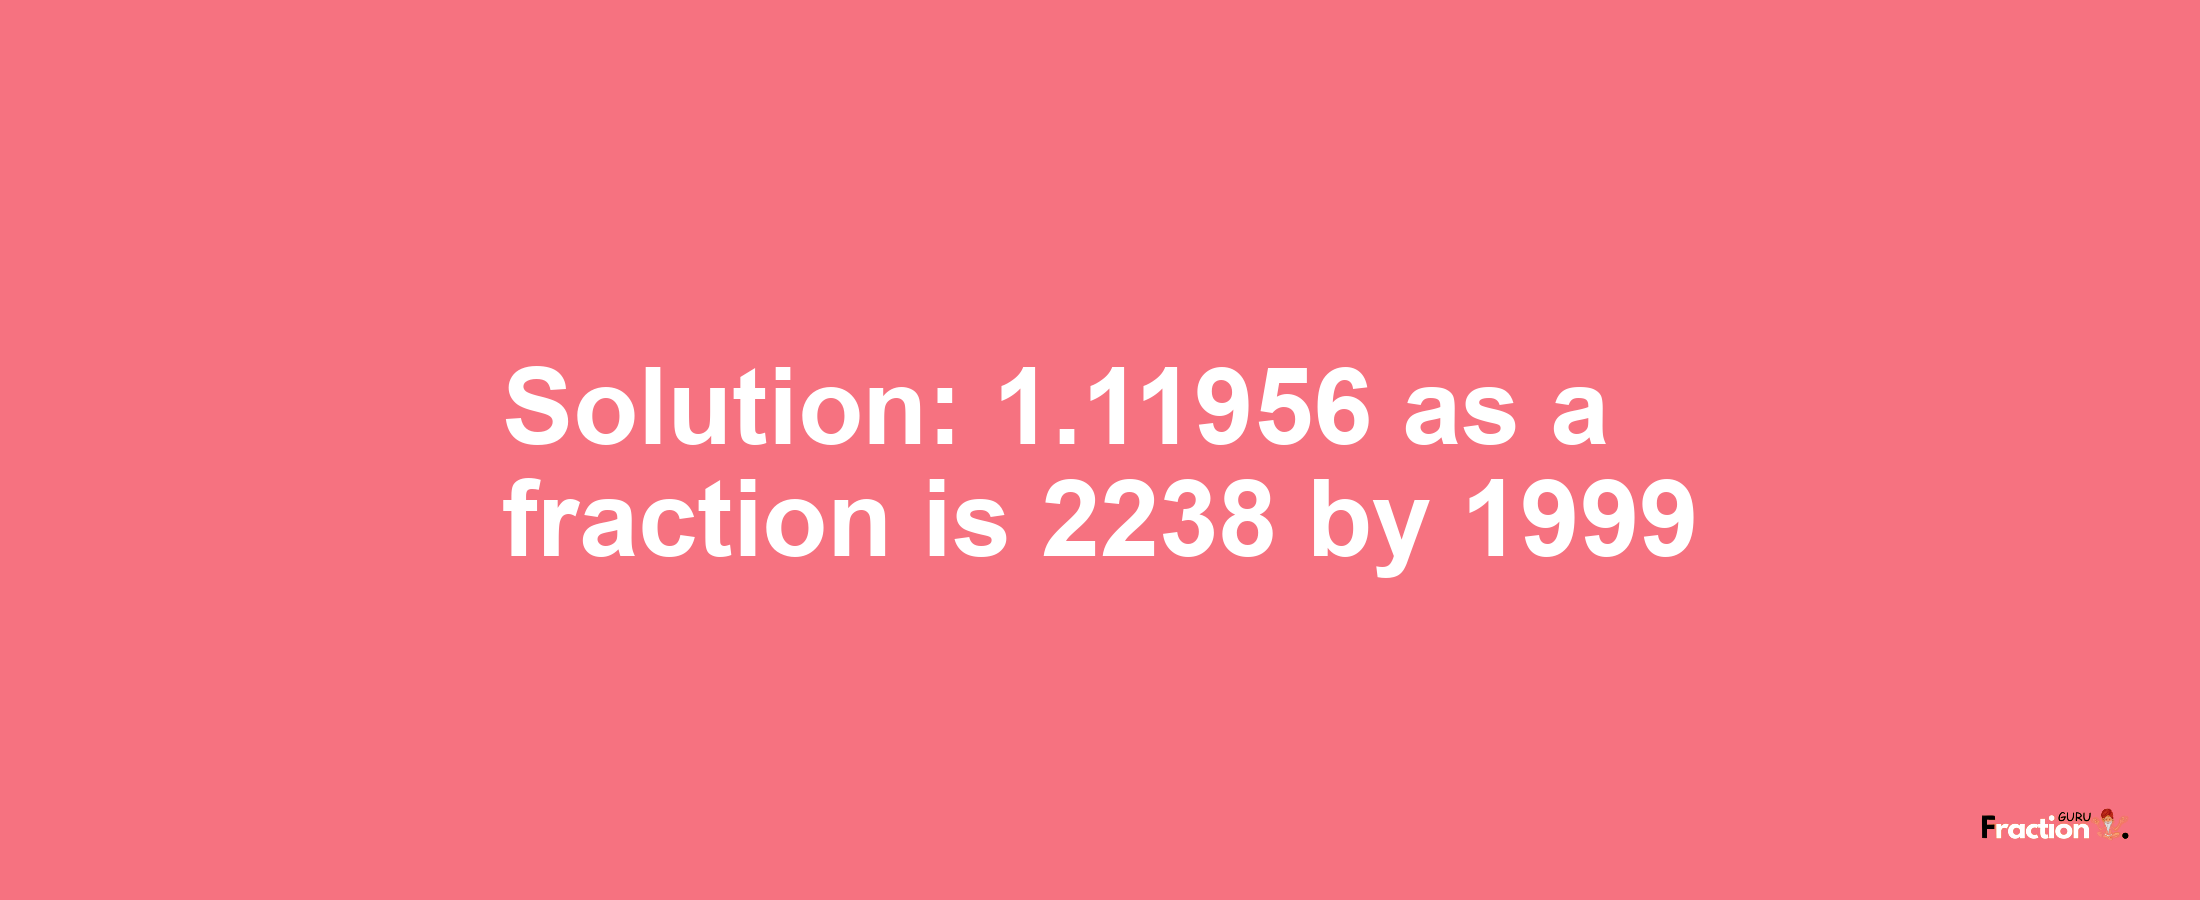 Solution:1.11956 as a fraction is 2238/1999